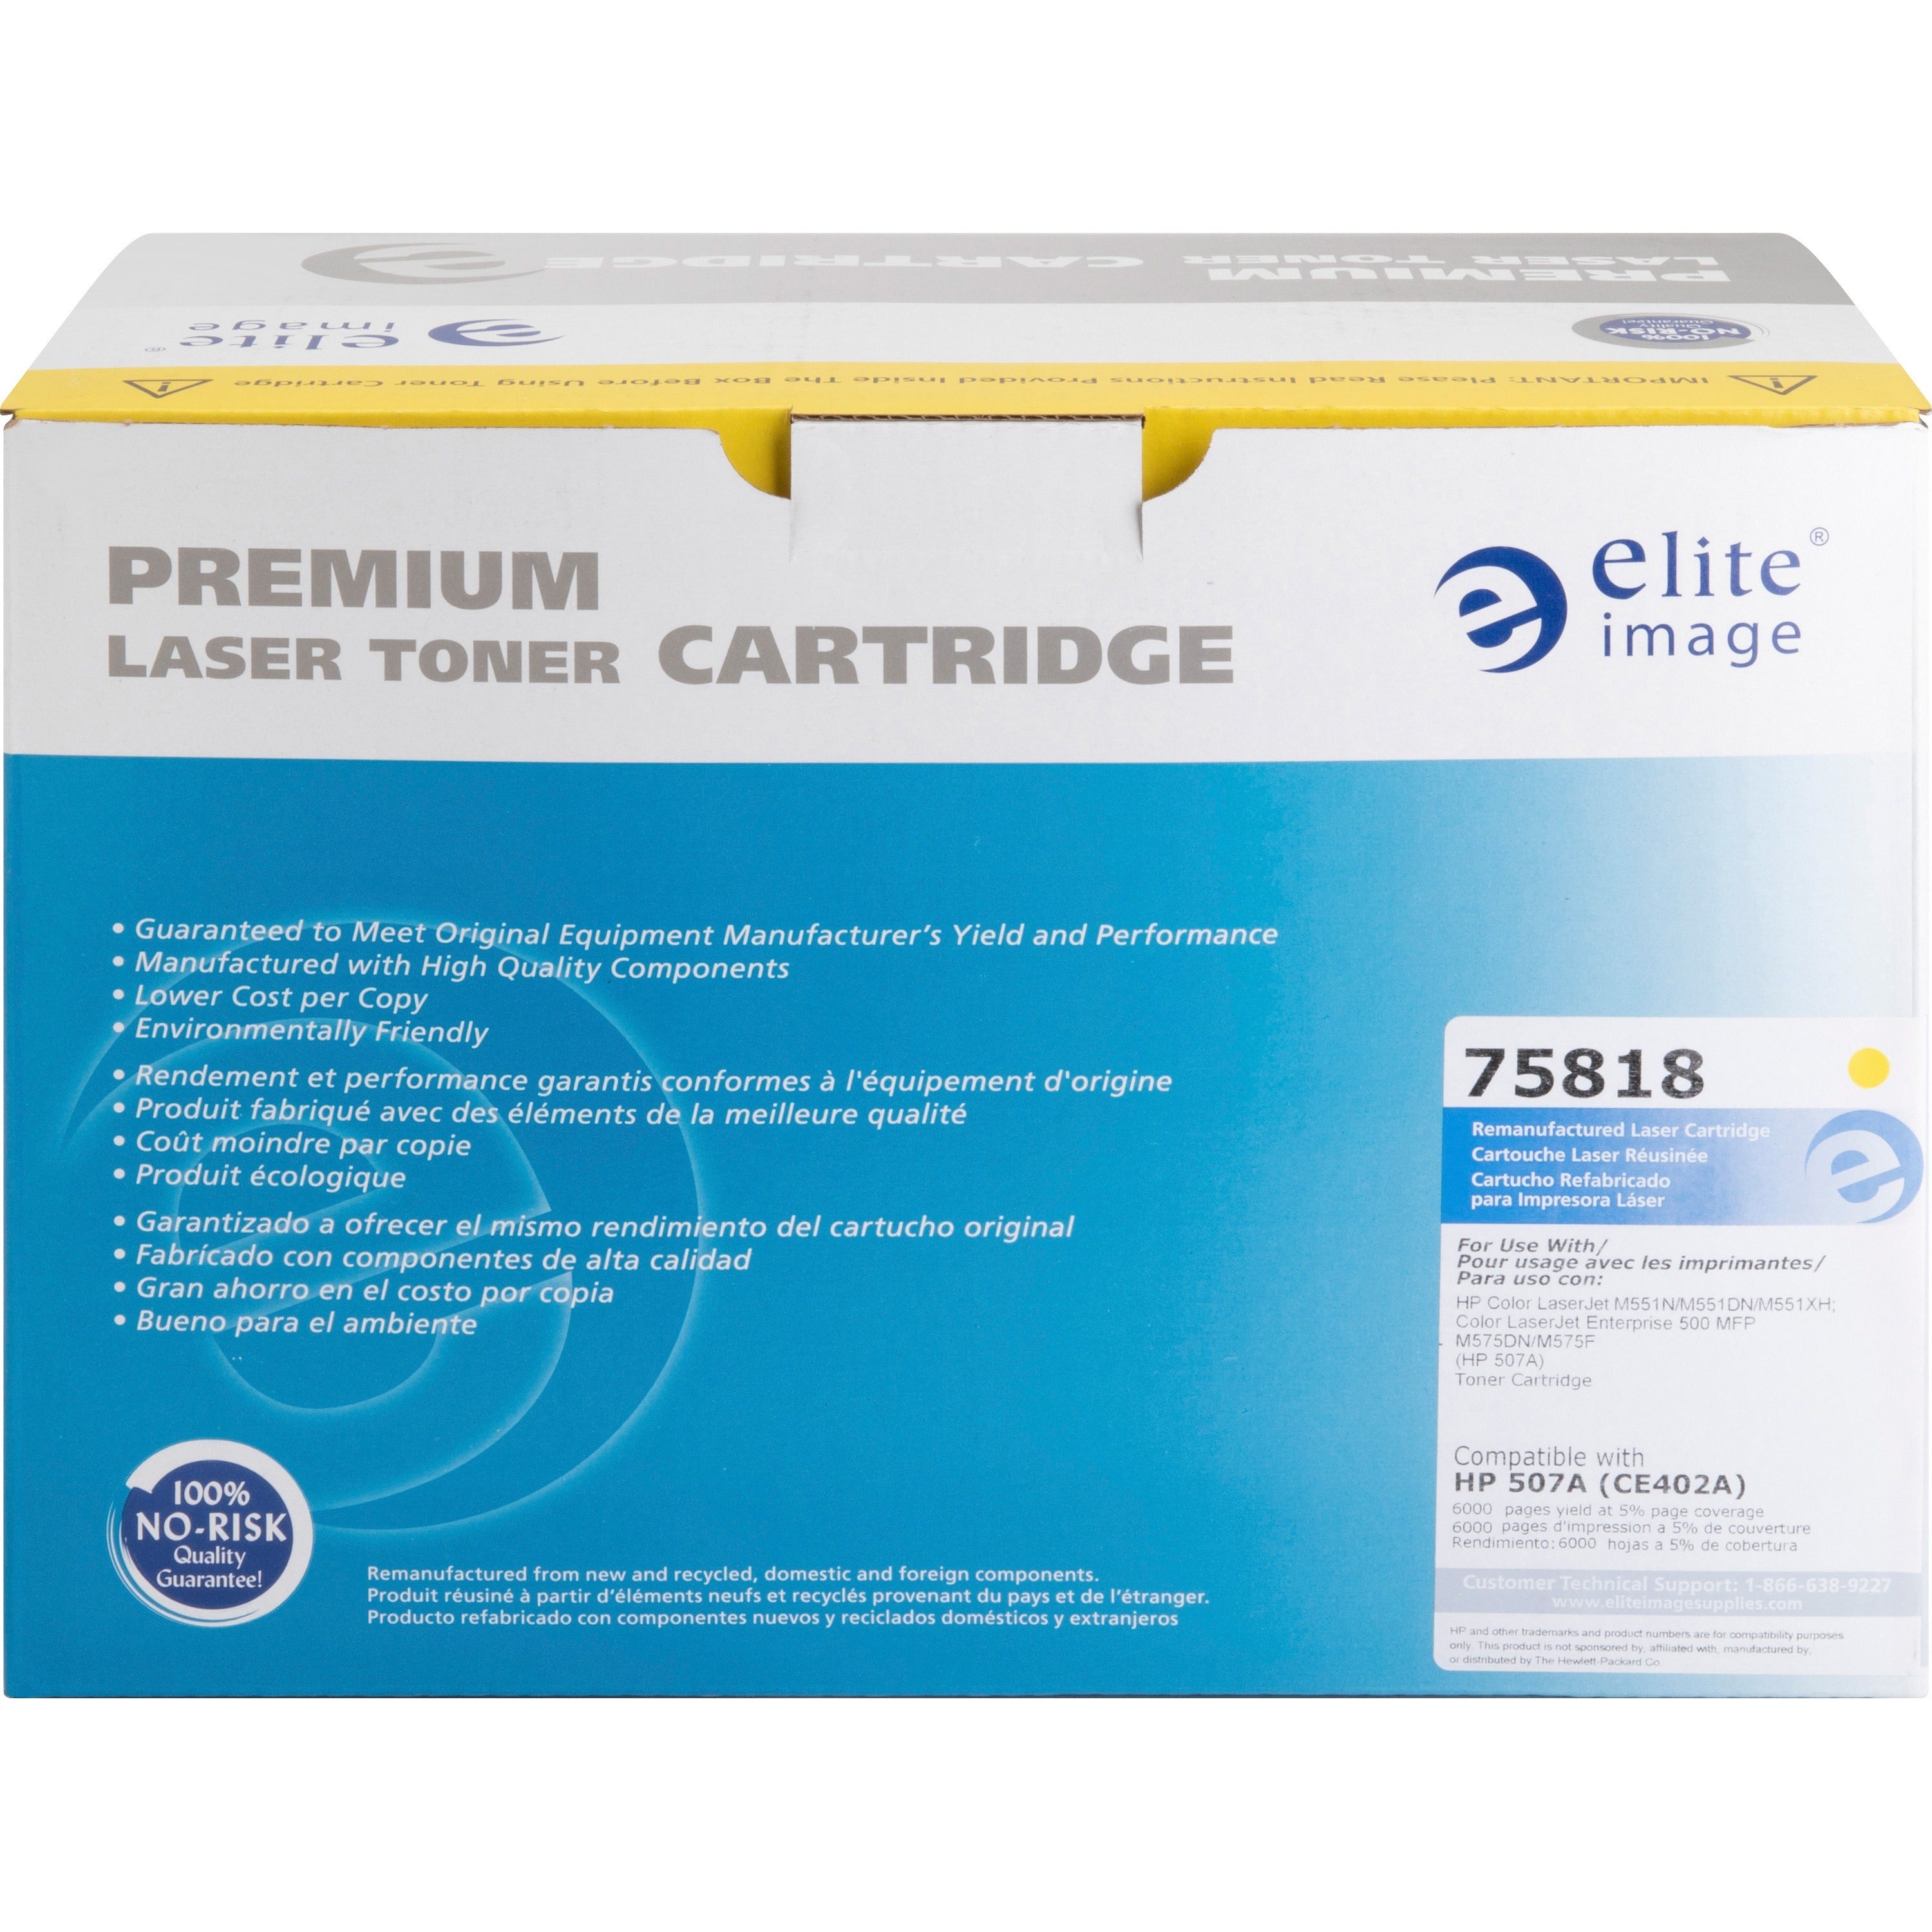 Elite Image Remanufactured Laser Toner Cartridge - Alternative for HP 507A (CE402A) - Yellow - 1 Each - 6000 Pages - 2